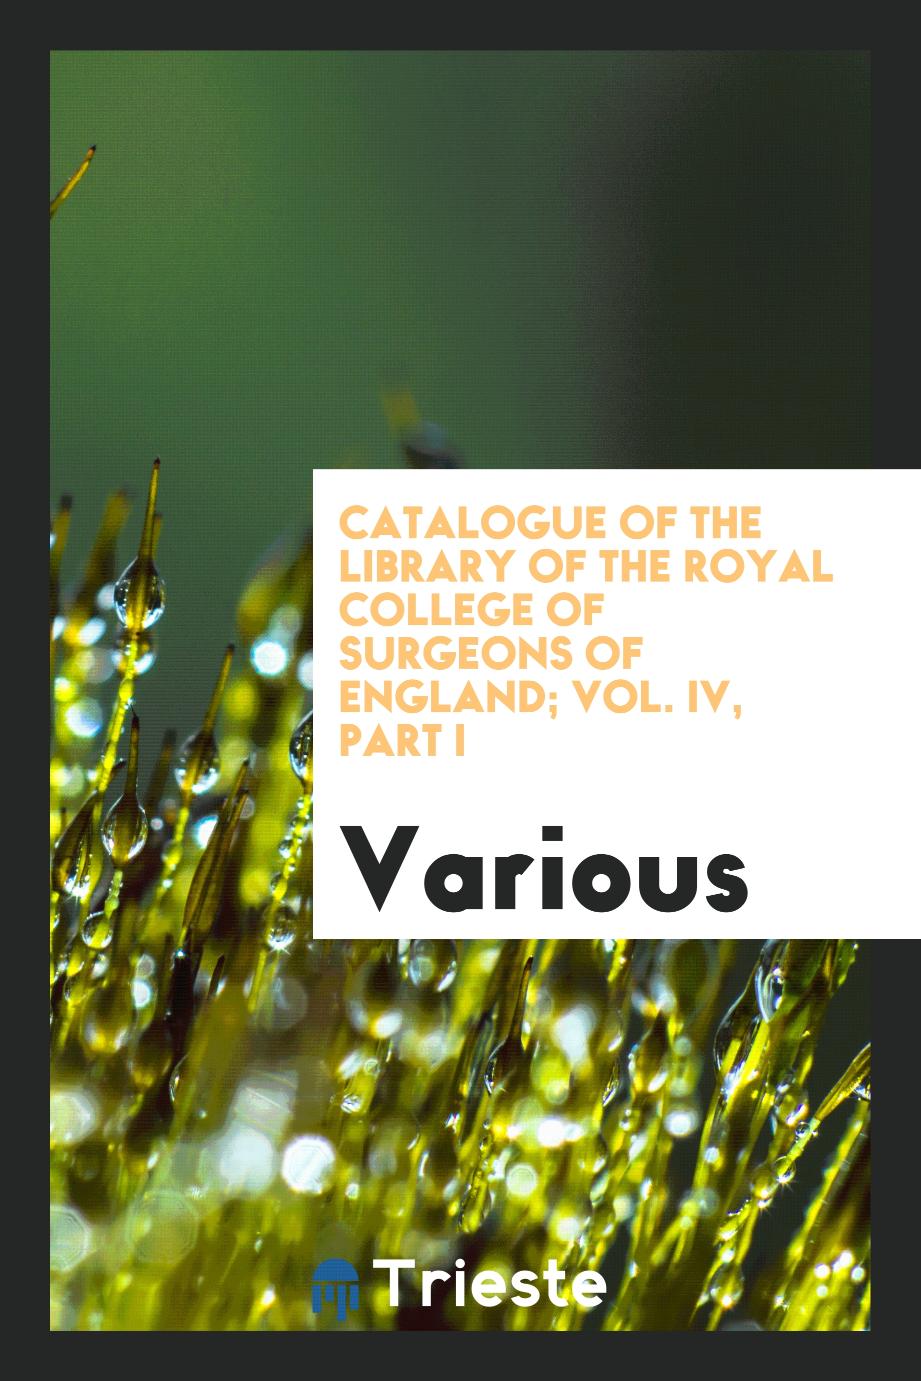 Catalogue of the Library of the Royal college of Surgeons of England; Vol. IV, Part I